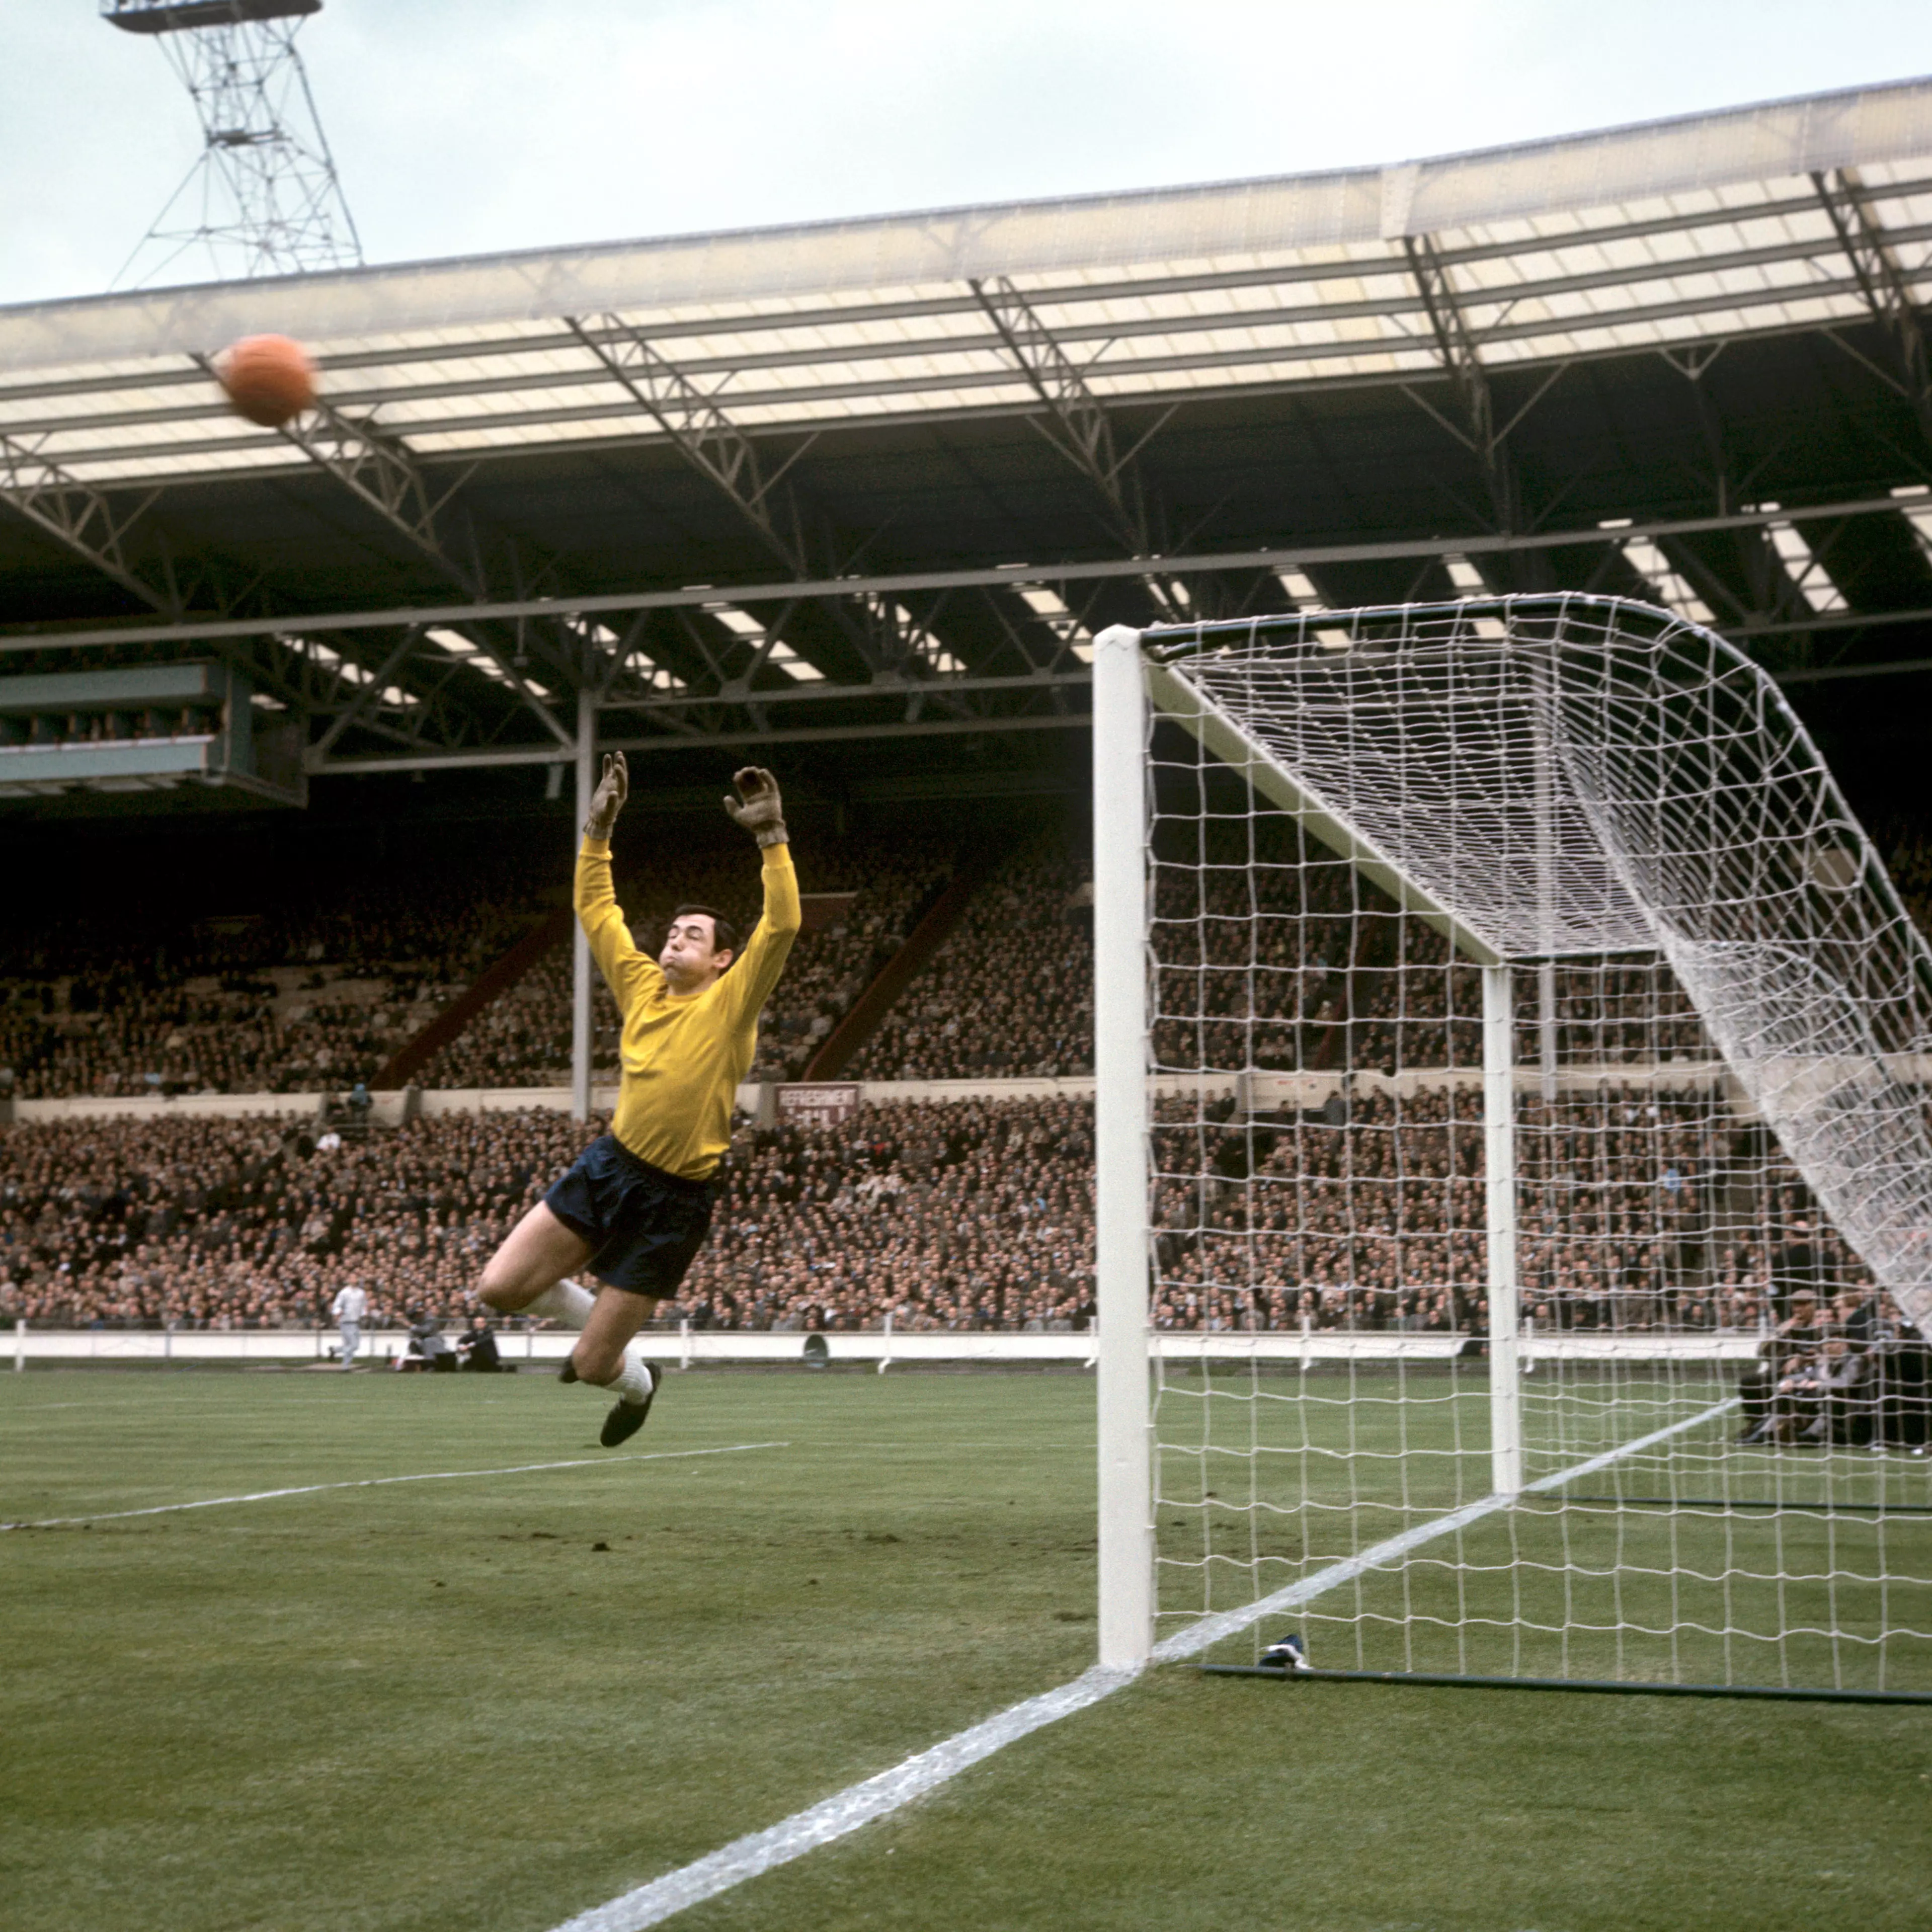 Gordon Banks is regarded as one of the finest goalkeepers to ever have played the game.